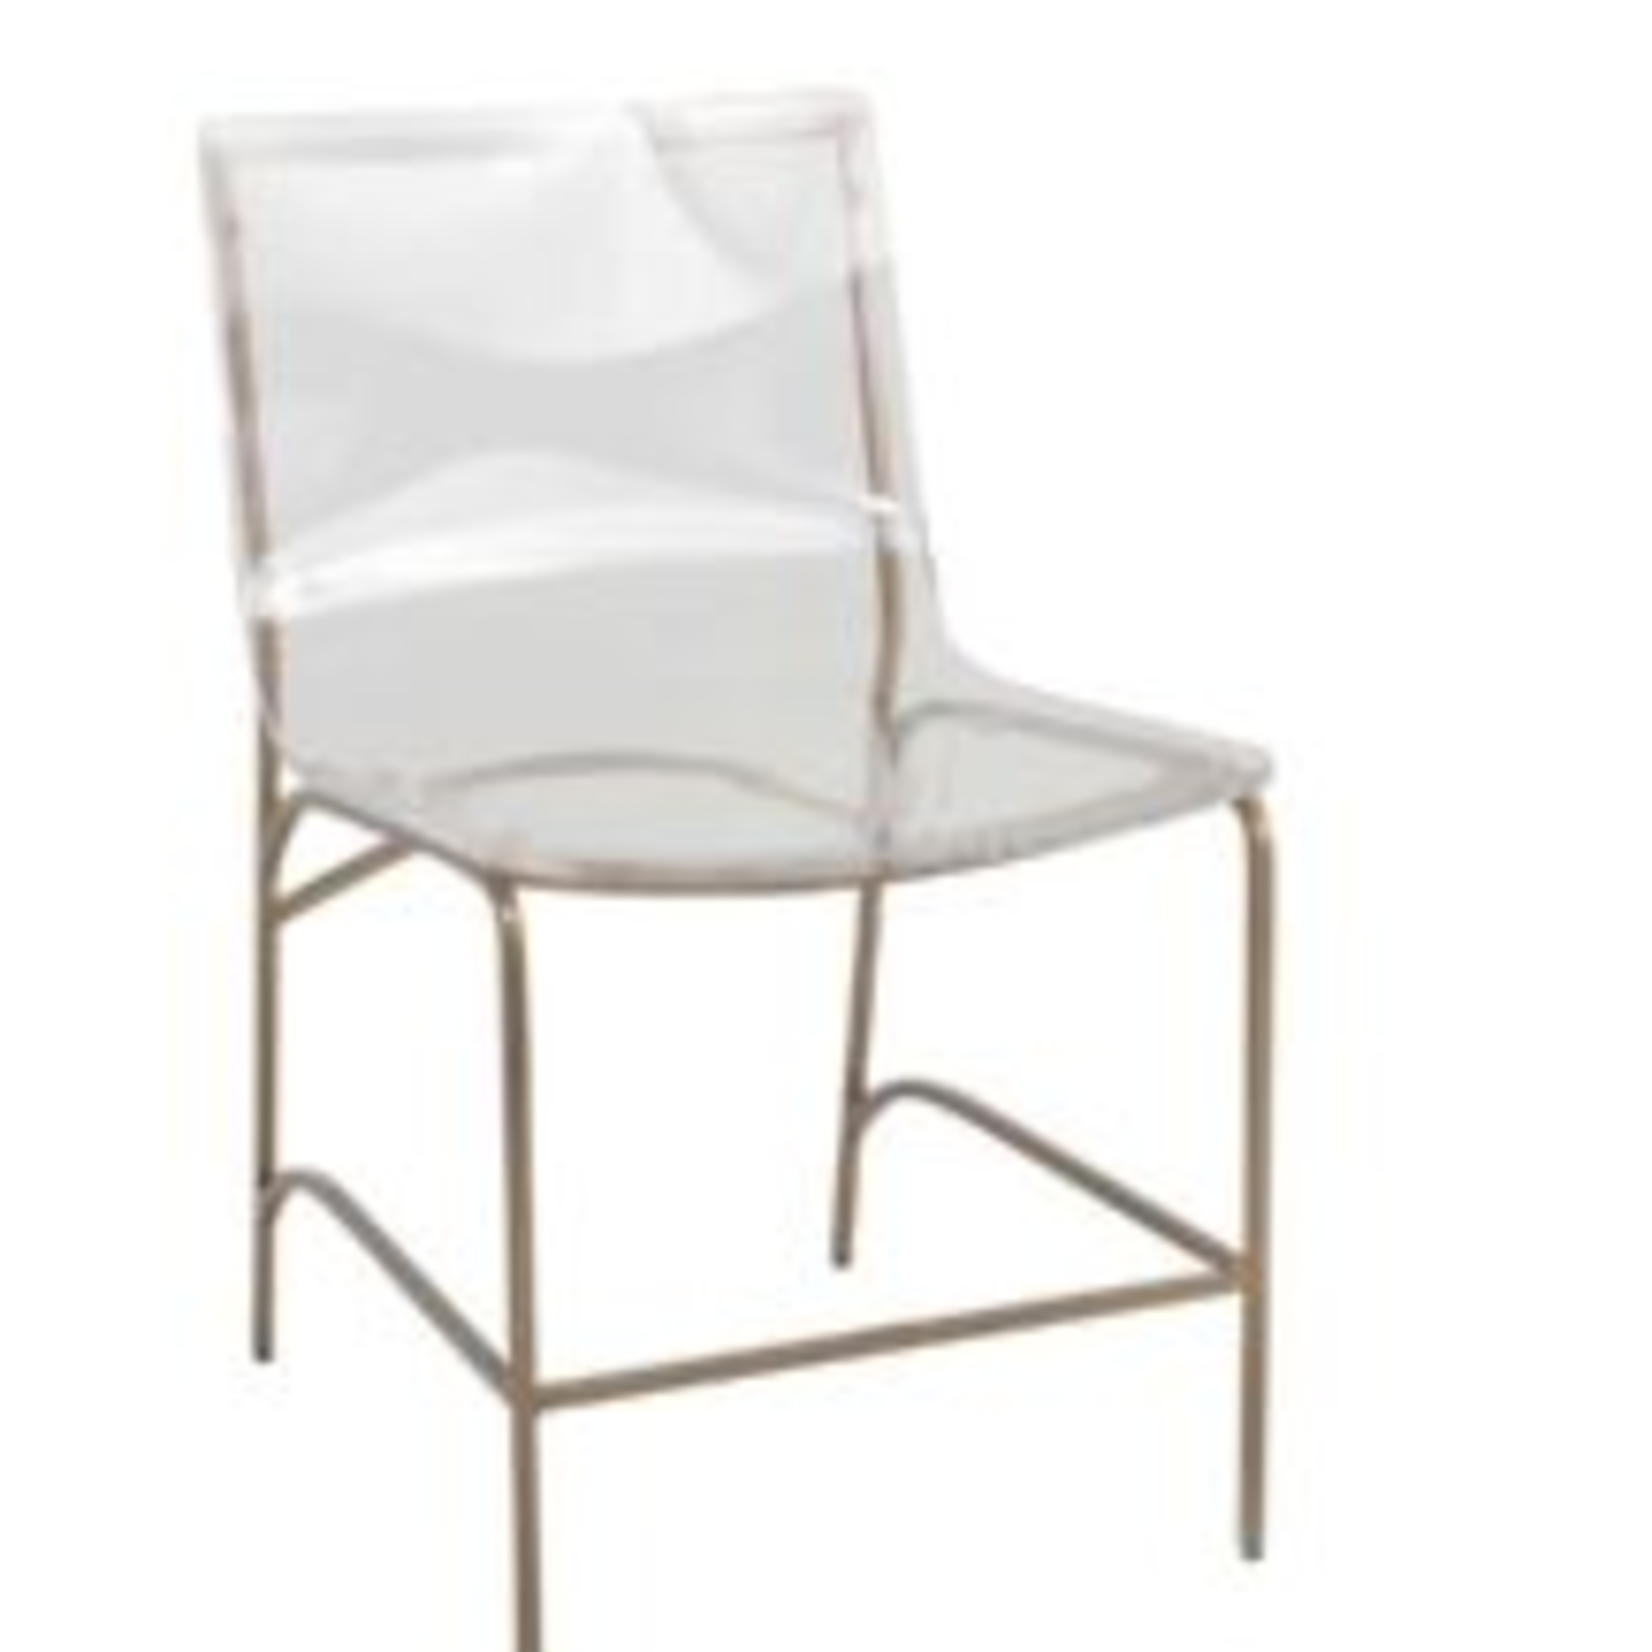 Penelope Dining Chair - Antique